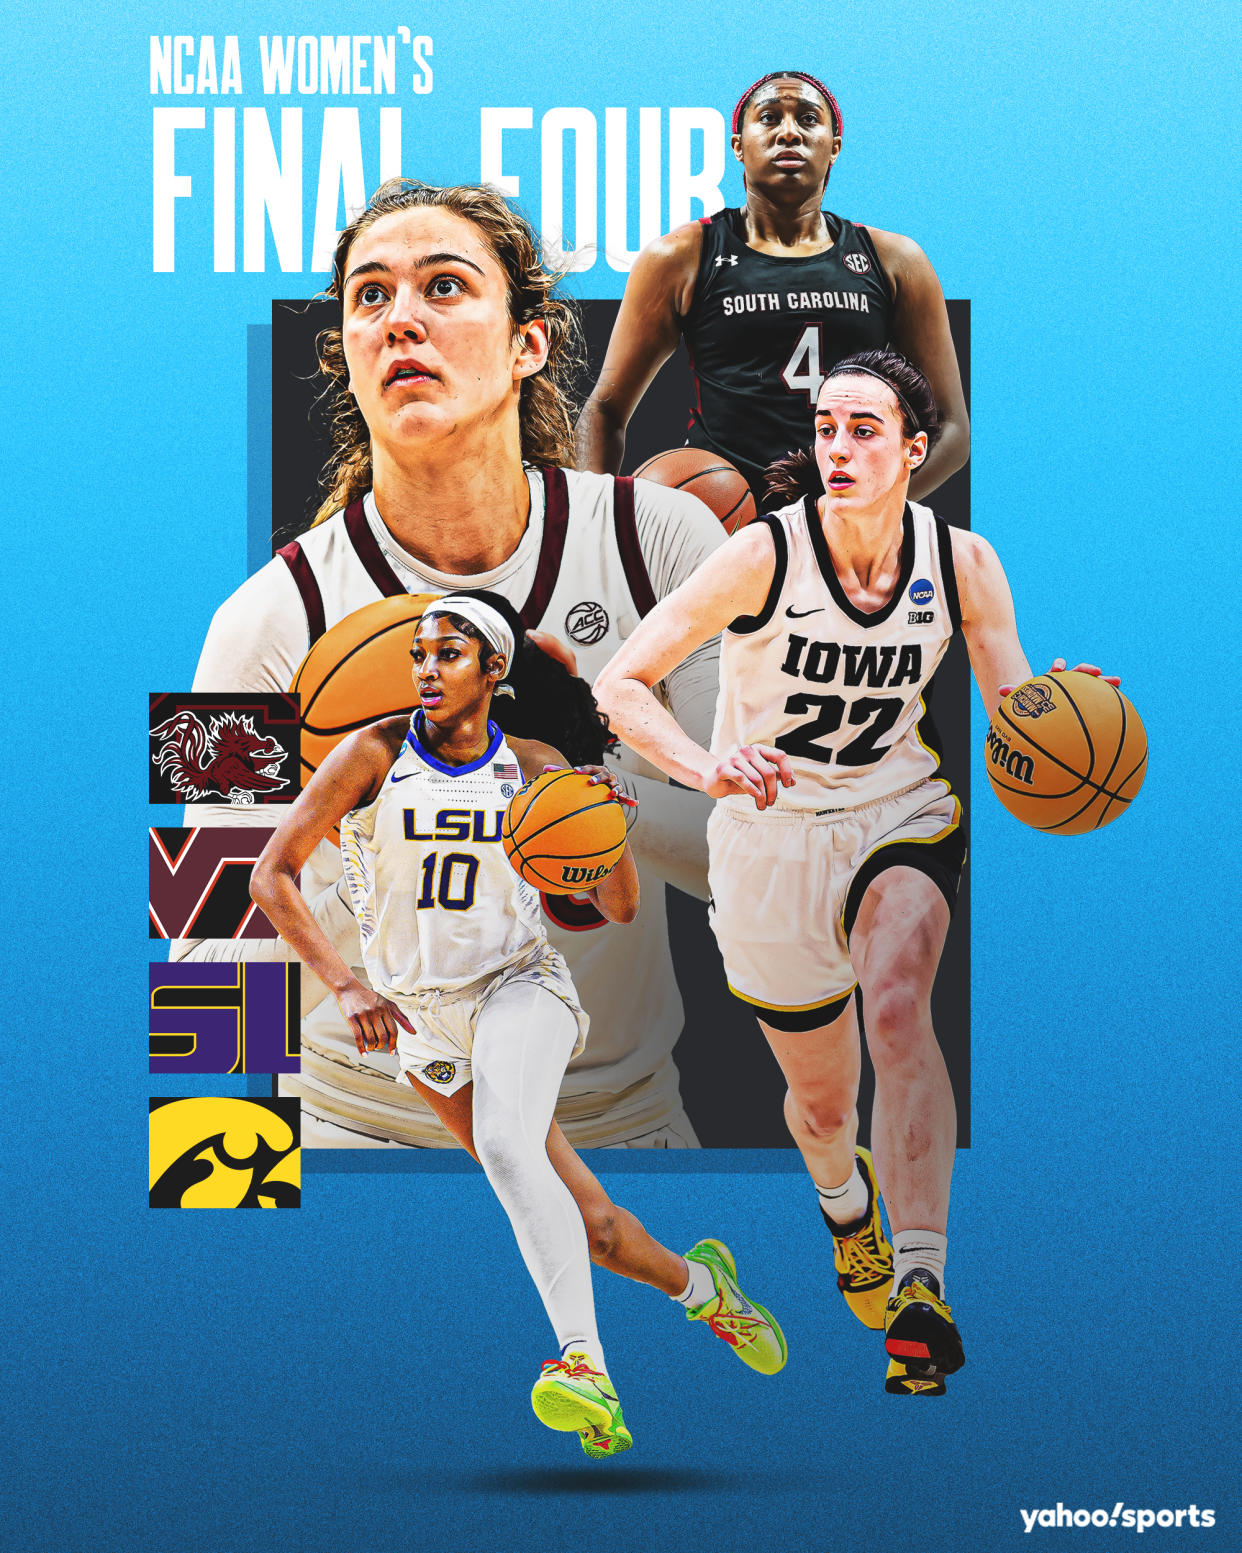 The NCAA women's tournament features star power in, clockwise from top right, Virginia Tech's Elizabeth Kitley, South Carolina's Aliyah Boston, Iowa's Caitlin Clark and LSU's Angel Reese. (Graphic by Moe Haidar/Yahoo Sports)